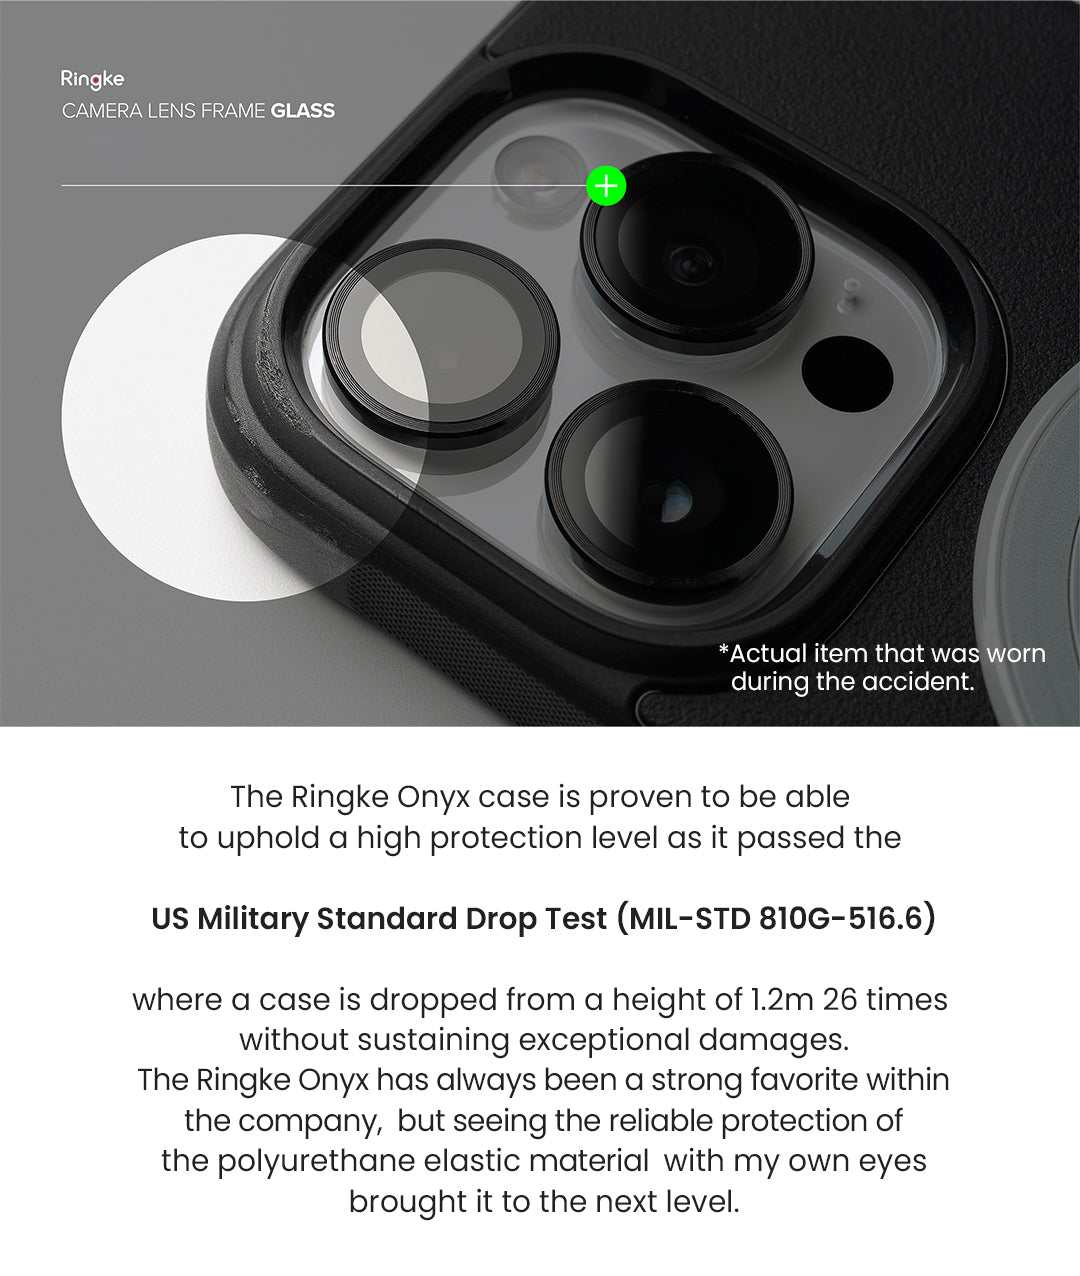 The Ringke Onyx case is proven to be able to uphold a high protection level as it passed the US Military Standard Drop Test (MIL-STD 810G-516.6 where a case is dropped from a height of 1.2 meters 26 times without sustaining exceptional damages. The Ringke Onyx has always been a strong favorite within the company, but seeing the reliable protection of polyurethane elastic material with my own eyes brought it to the next level.